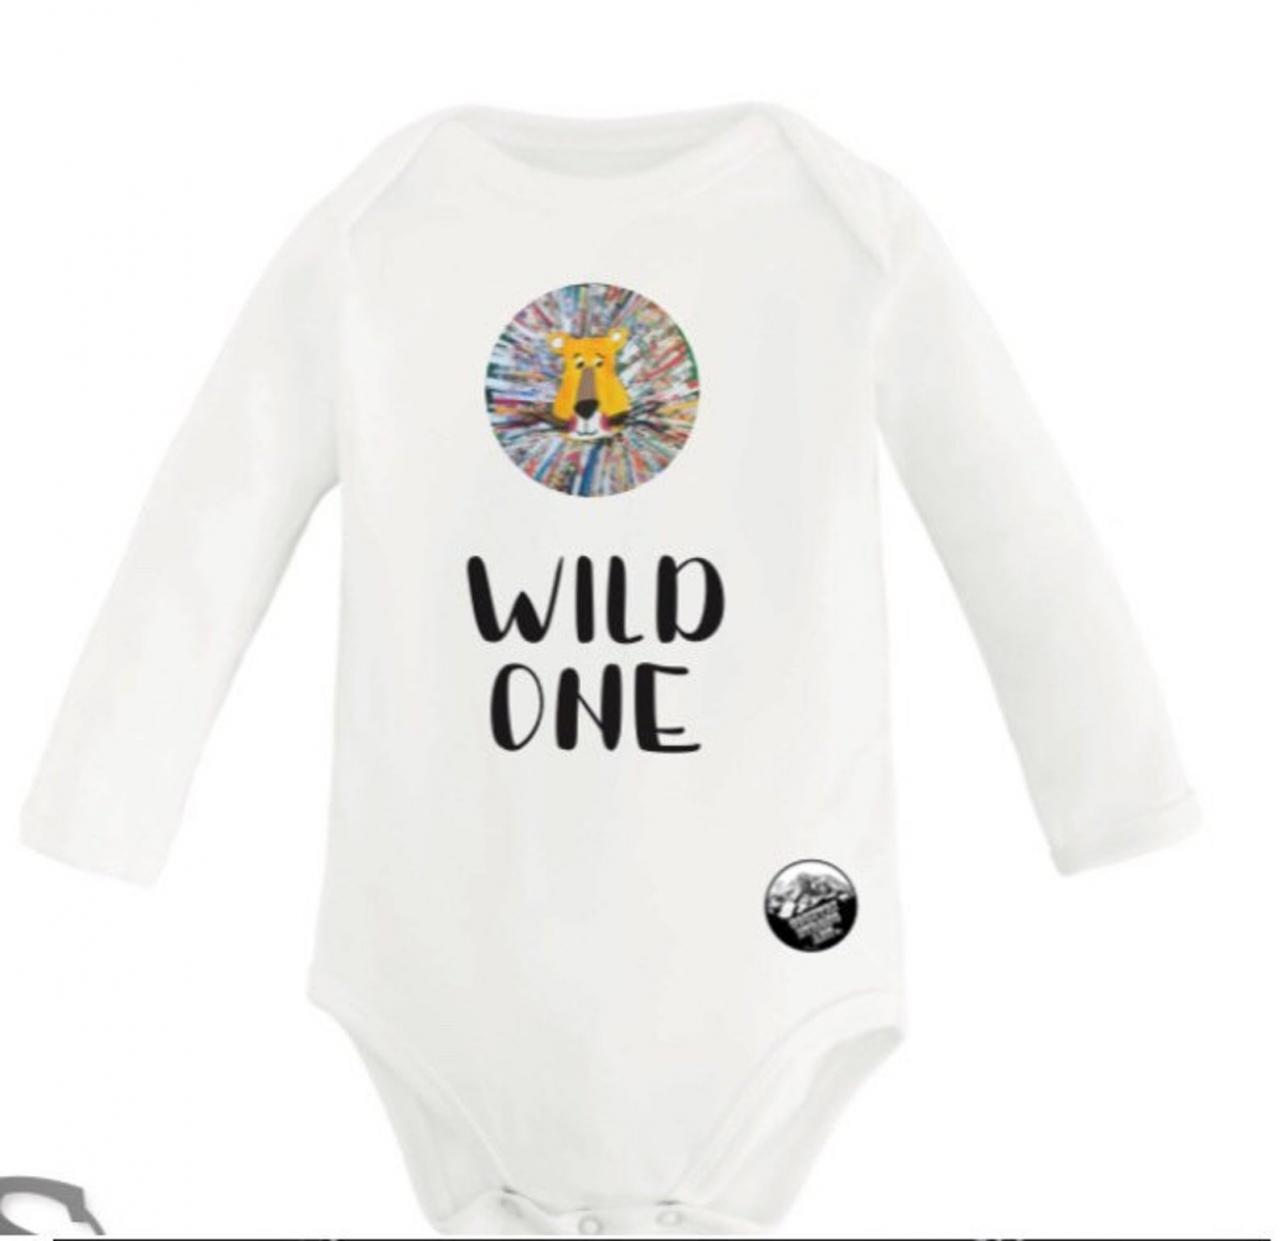 Wild One” Lion Printed Baby Onsie Lion King Print Baby Onsie Funny Baby Onesies®, Baby Shower Gift, Funny Baby Bodysuit